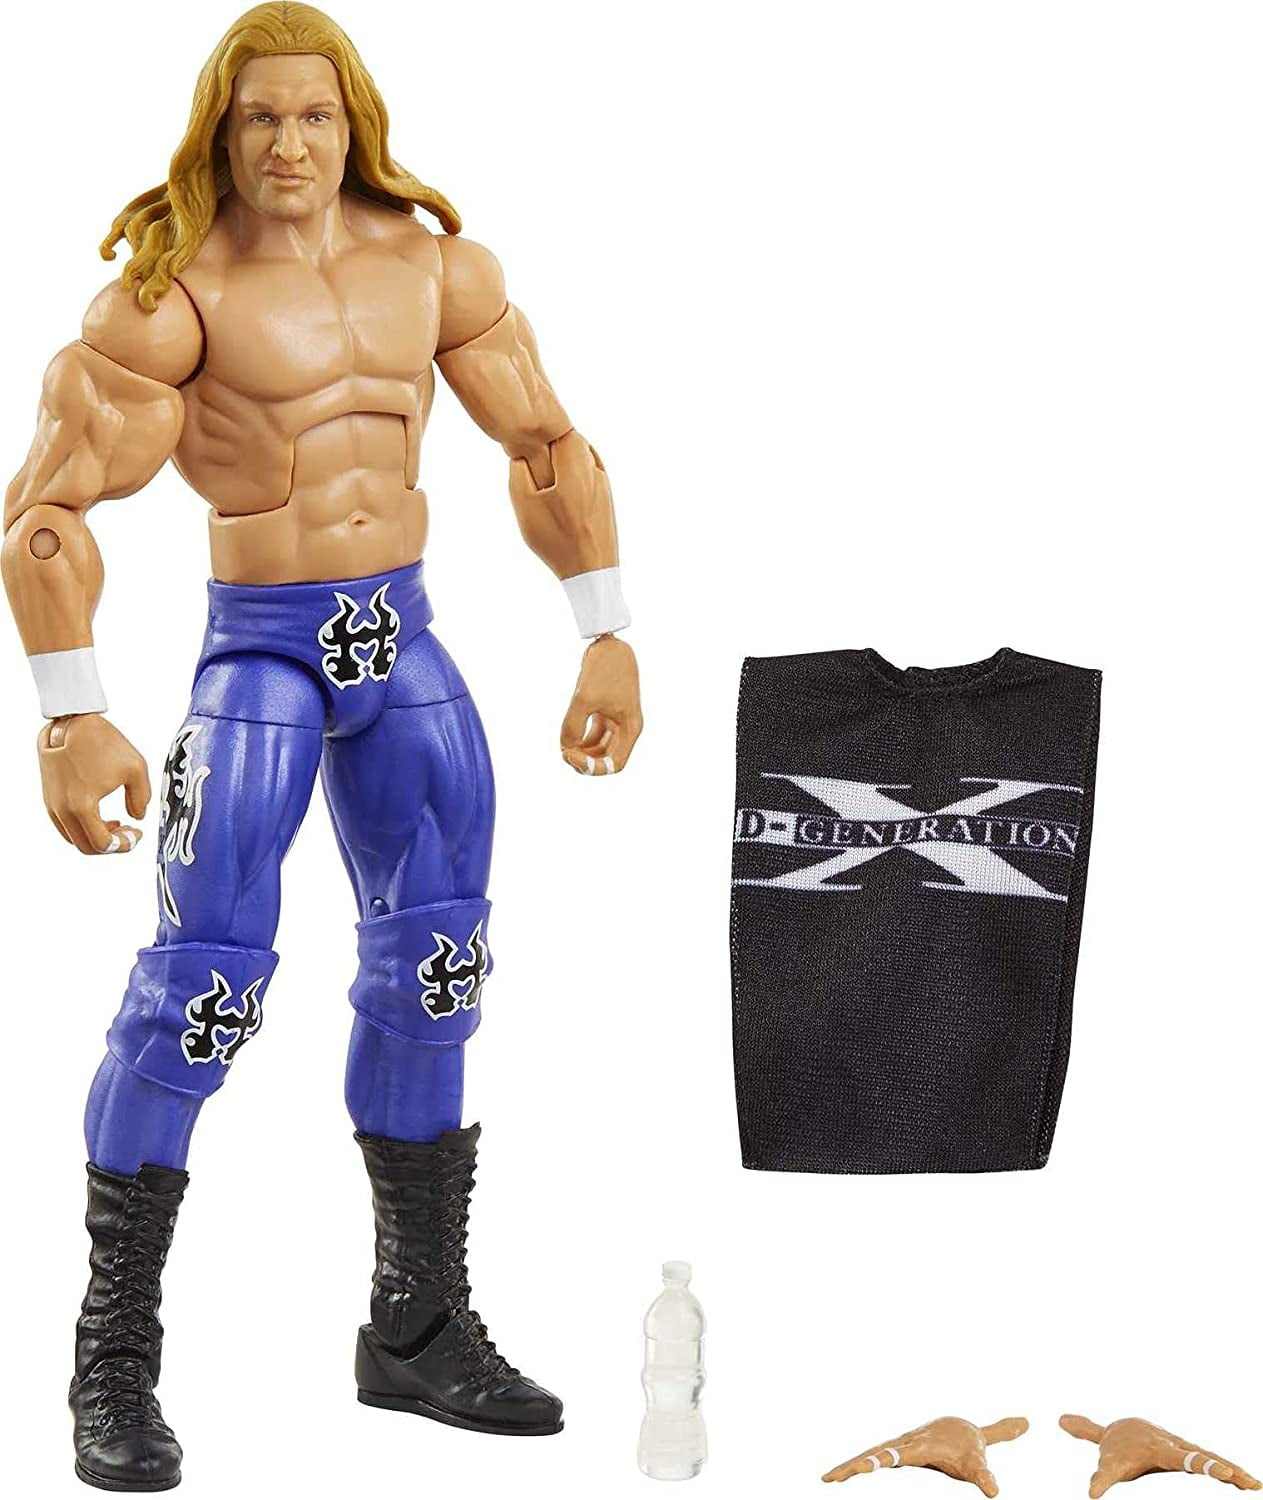 WWE Triple H Action Figure Posable 6-in Collectible for Ages 6 Years Old and Up